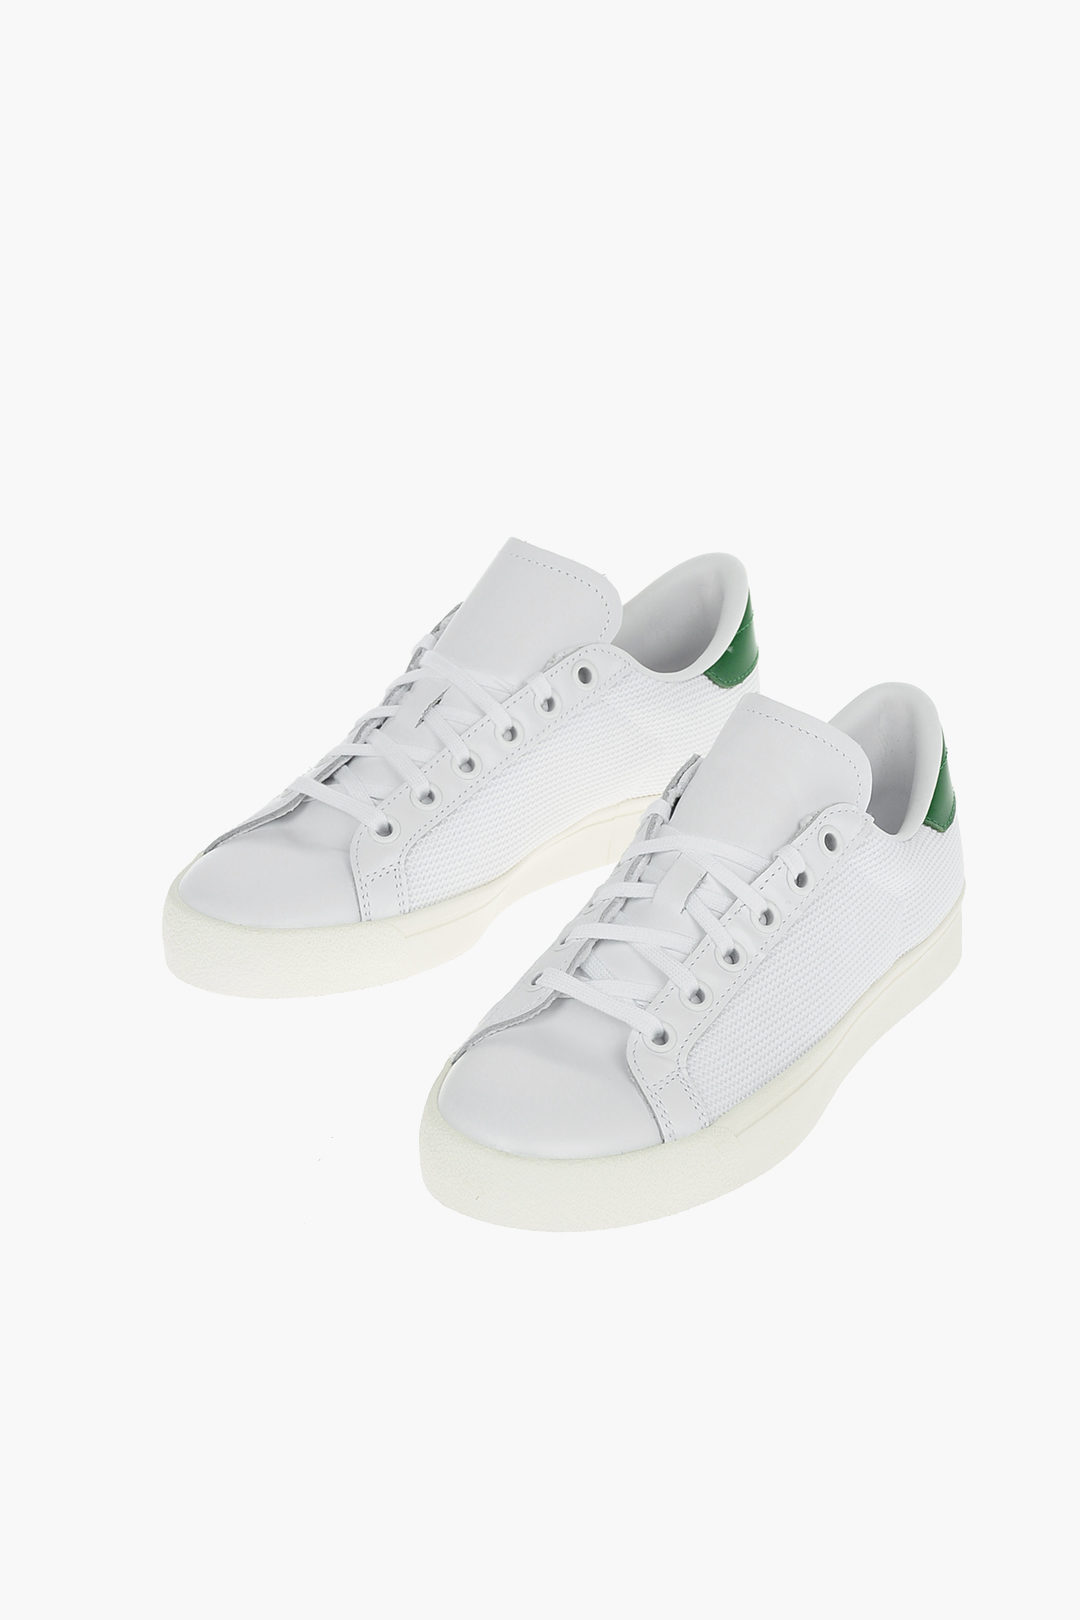 Adidas Chevron Fabric ROD LAVER VIN Low-Top Sneakers Leather Details unisex men women - Glamood Outlet